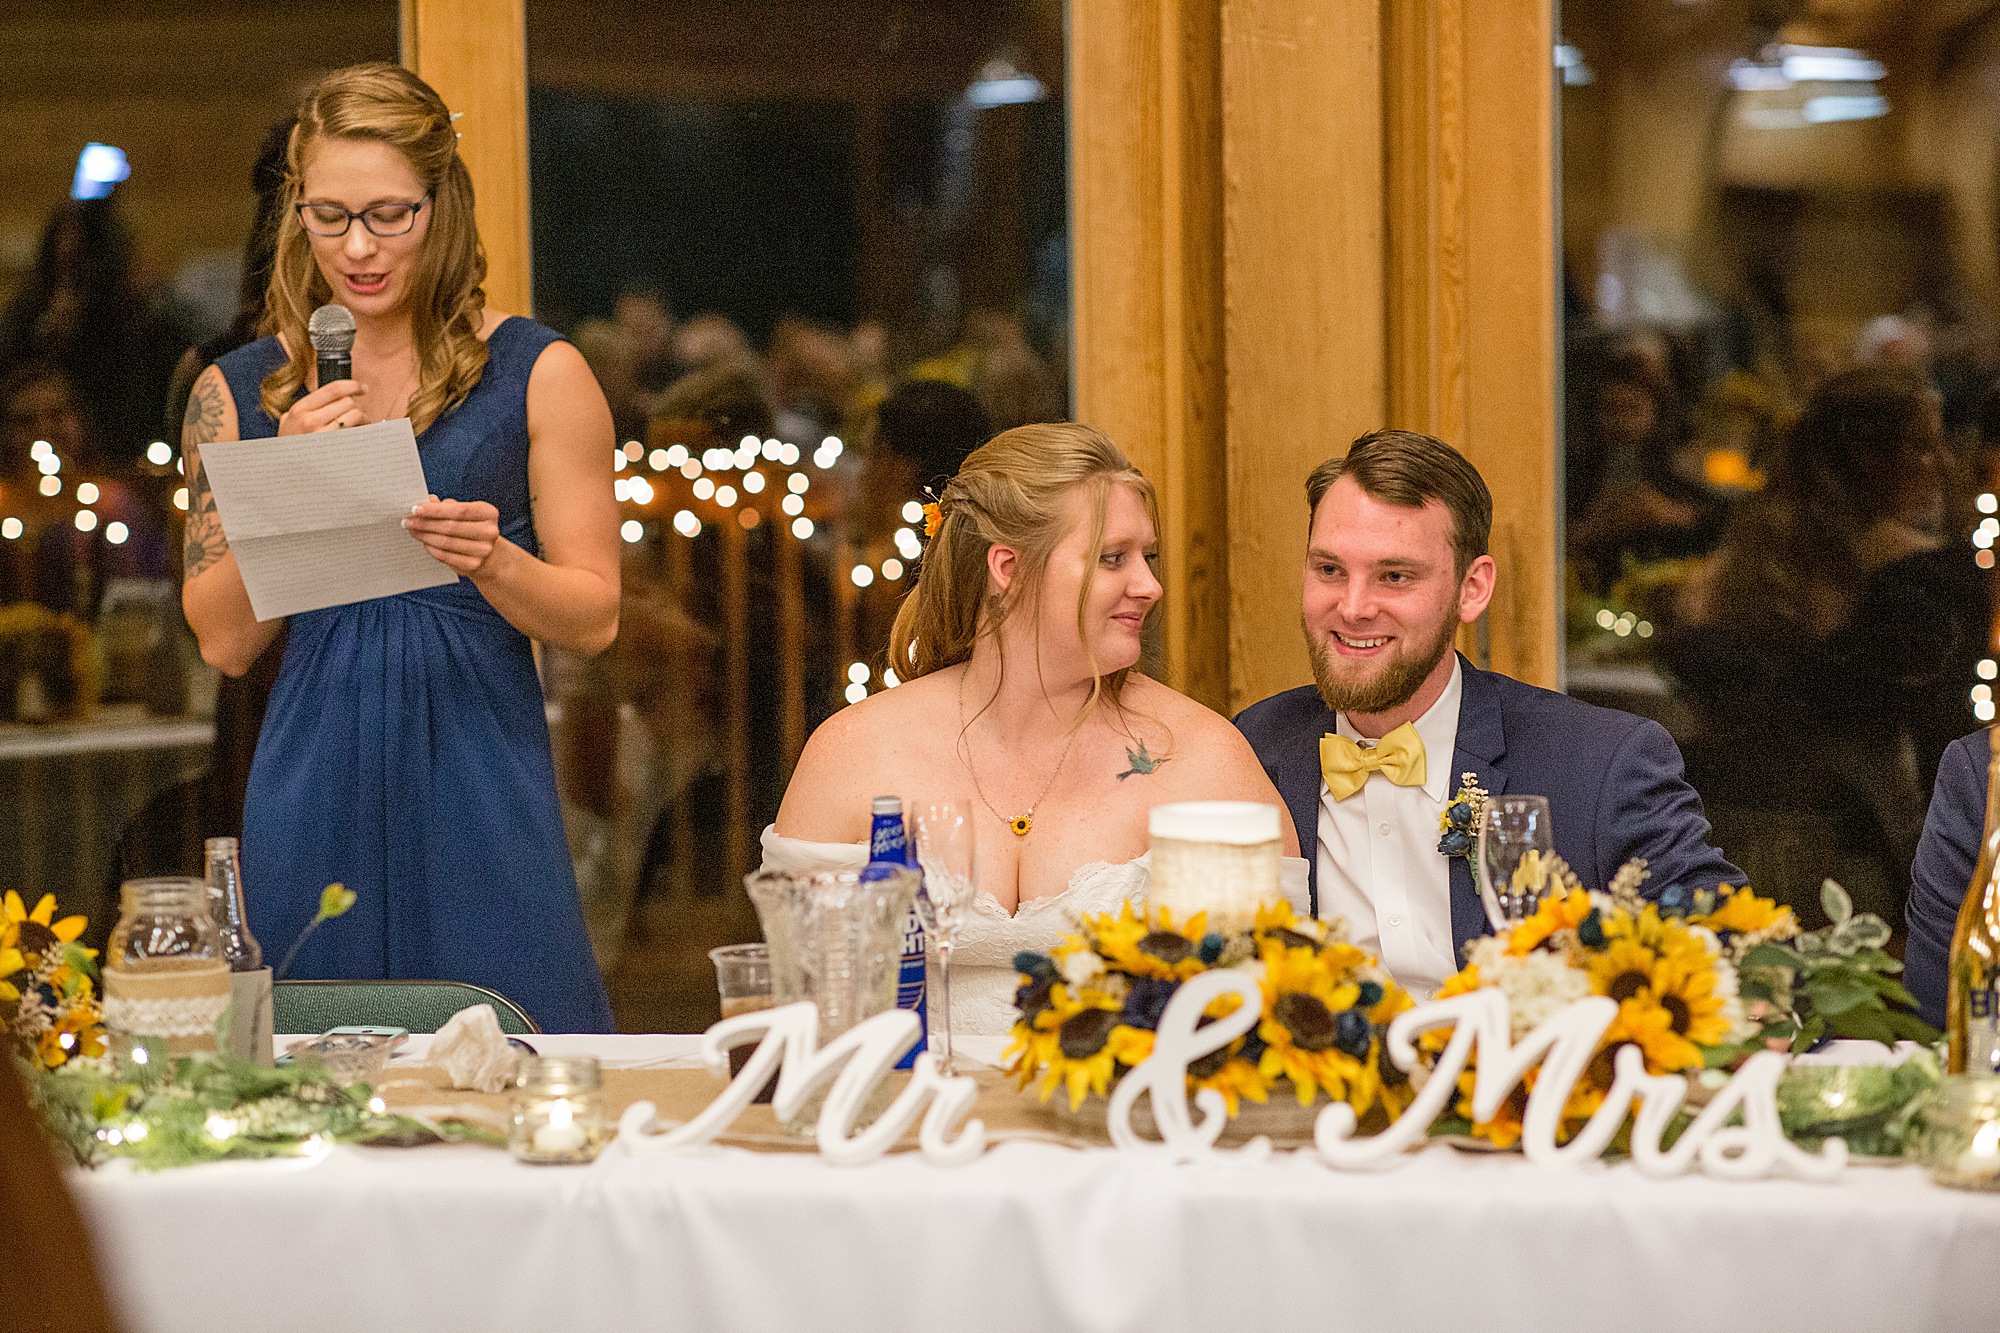 wedding toasts from maid of honor at MO wedding reception